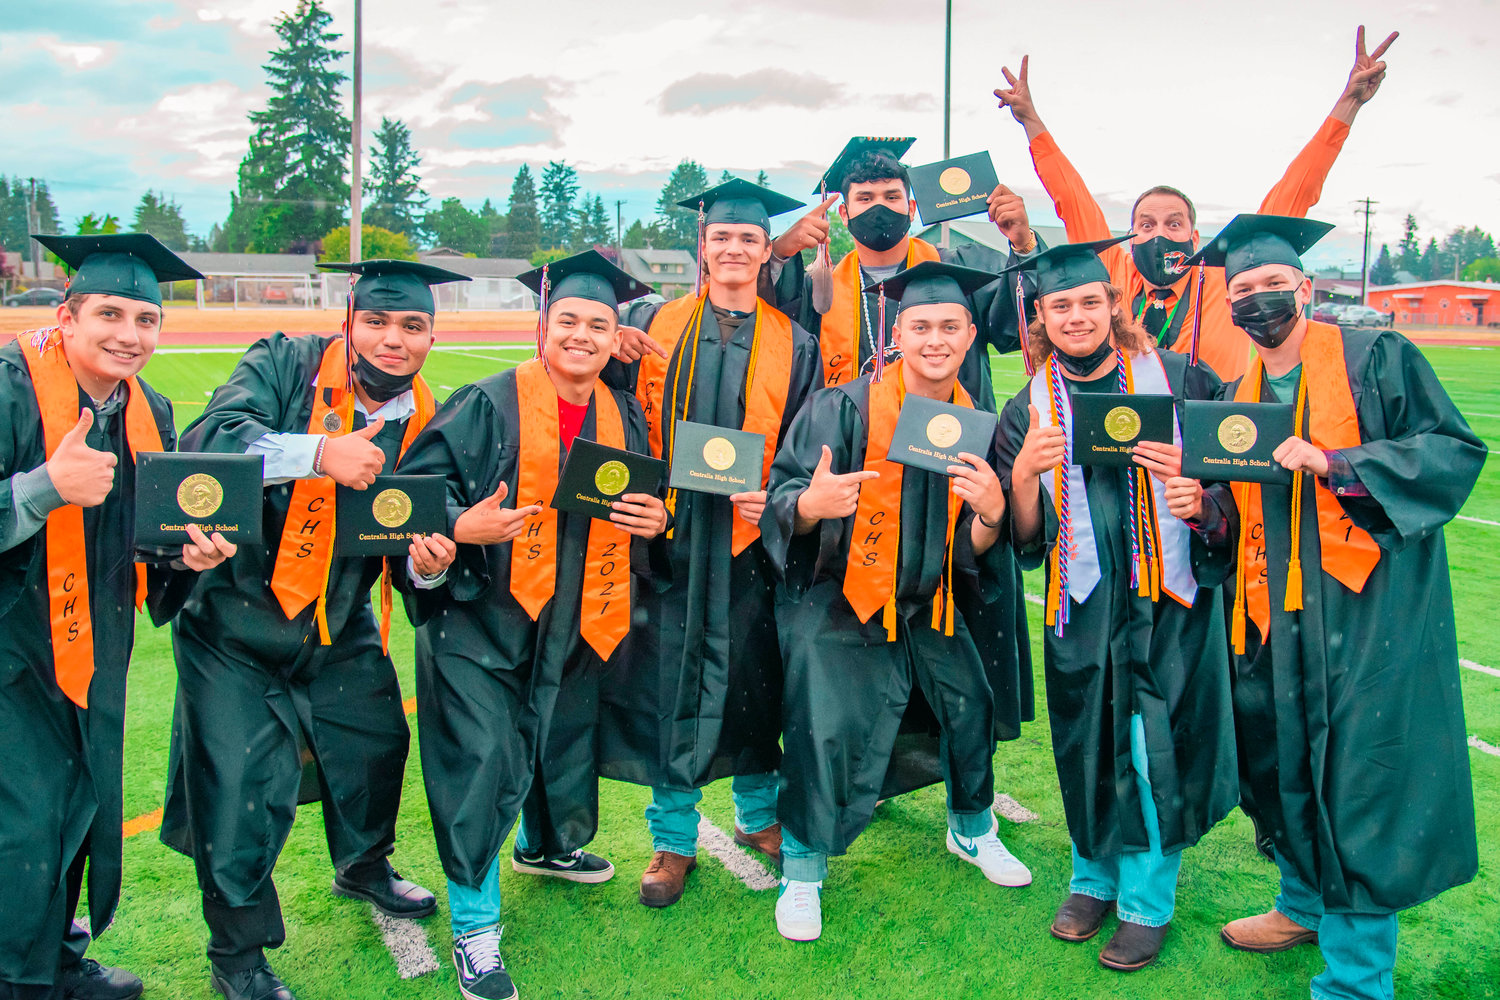 Centralia High School’s Assistant Principal Mike Stratton poses for a photo with graduates after they received their diplomas Friday night at Tiger Stadium.